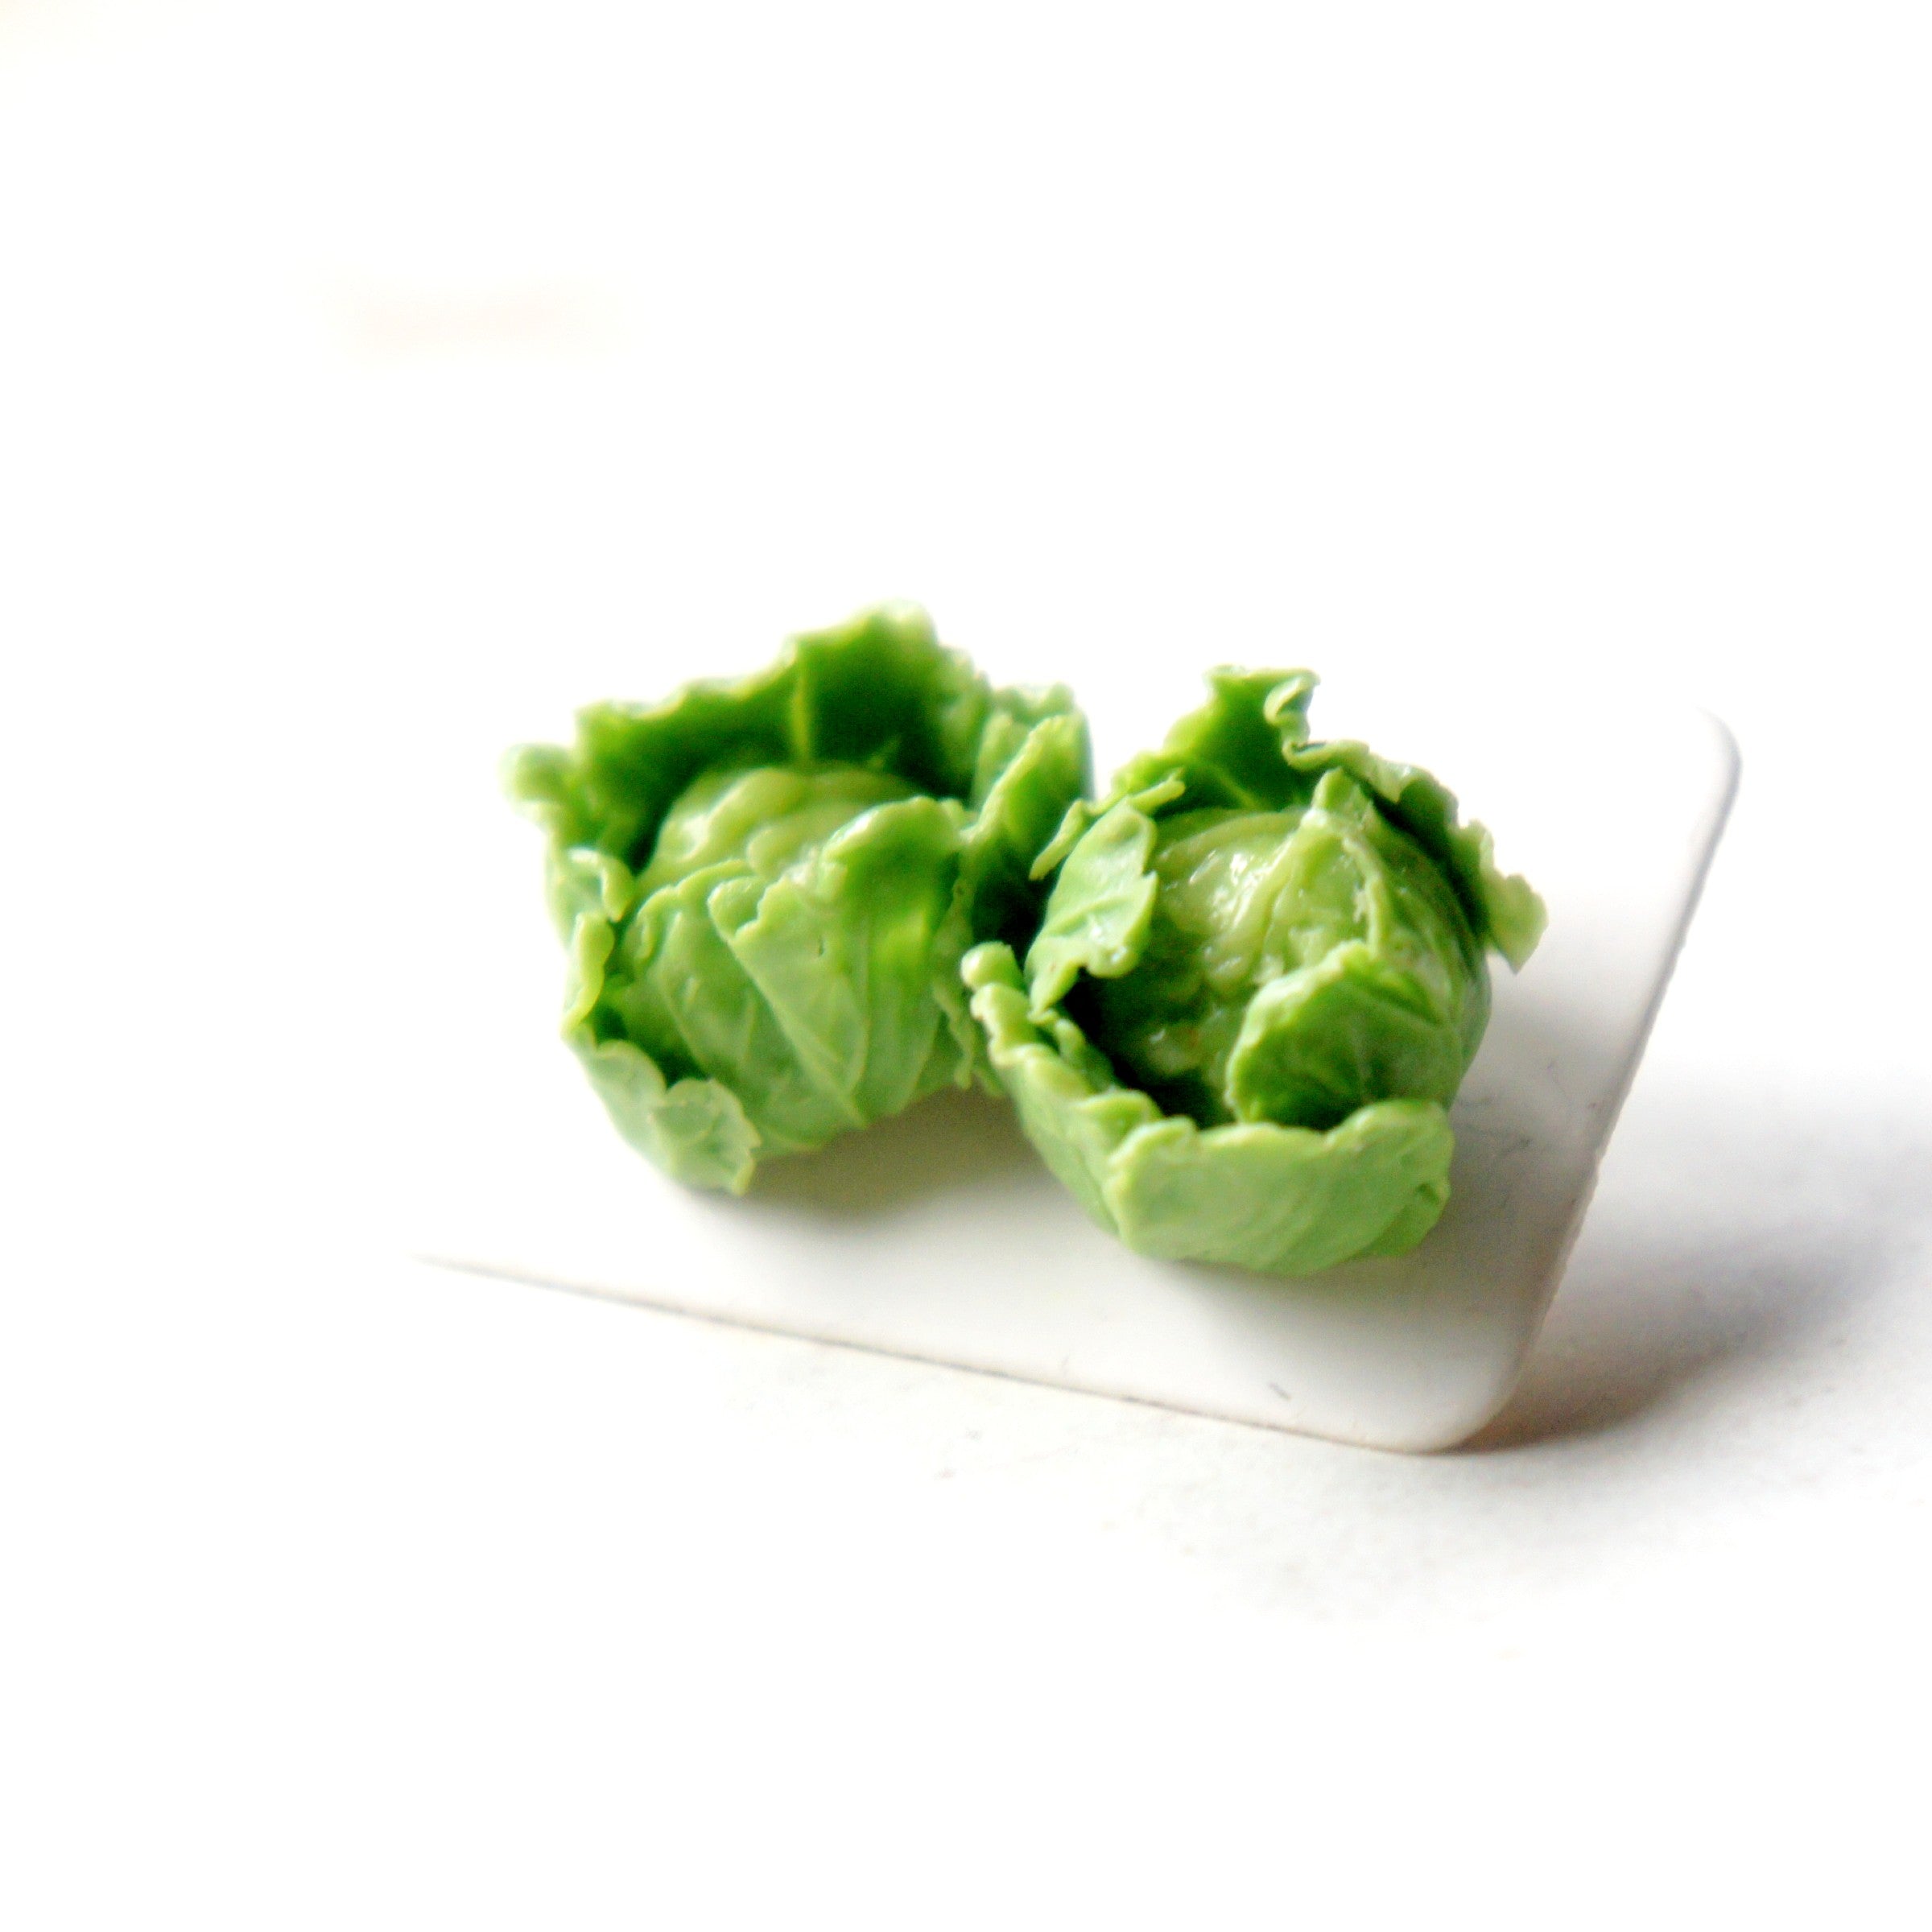 Cabbage Stud Earrings - Jillicious charms and accessories